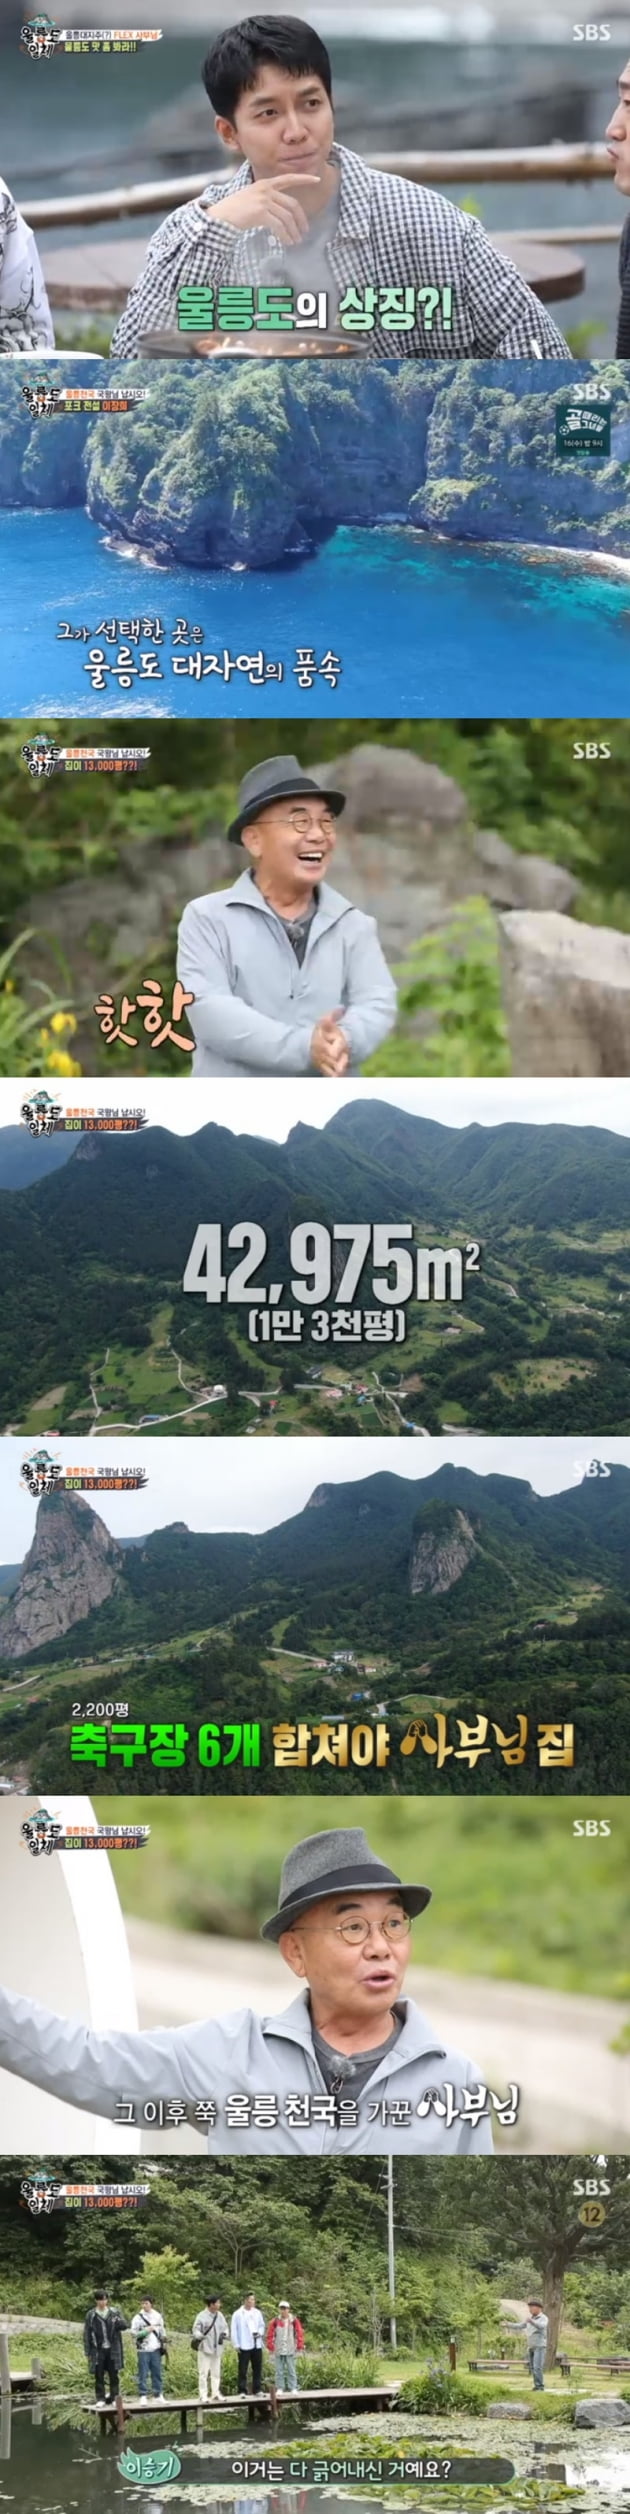 All The Butlers Yi Jang-hui introduced the home of Ulleungdo.SBS All The Butlers, which is broadcasted on the 13th, starred folk legend Yi Jang-hui as master.Yi Jang-hui lives in Ulleungdo, where members headed for Ulleungdo.Yi Jang-hui said, Ulleungdo is my heaven, and introduced his house as 13,000 pyeong, which surprised everyone.He said, I made a garden while farming, he said, introducing the flagpole peak with a wonderful peak.a fairy tale that children and adults hear togetherstar behind photoℑat the same time as the latest issue